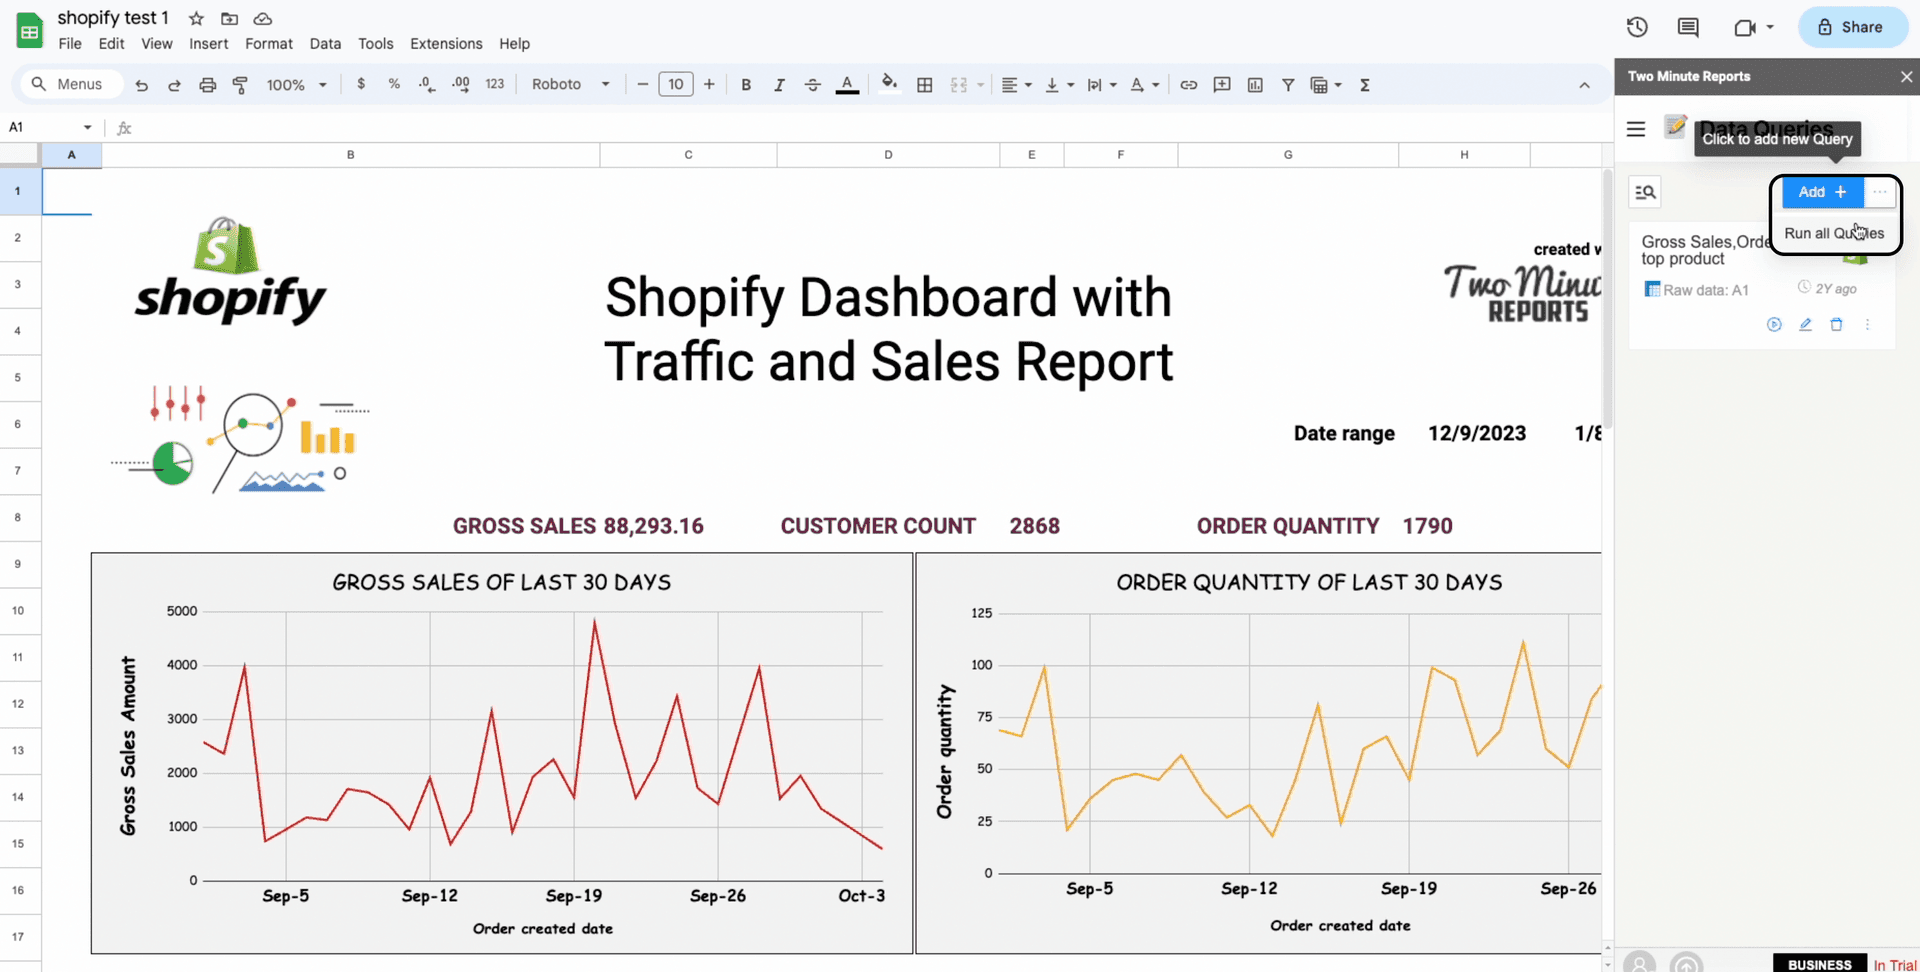 shopify to google sheets run all queries